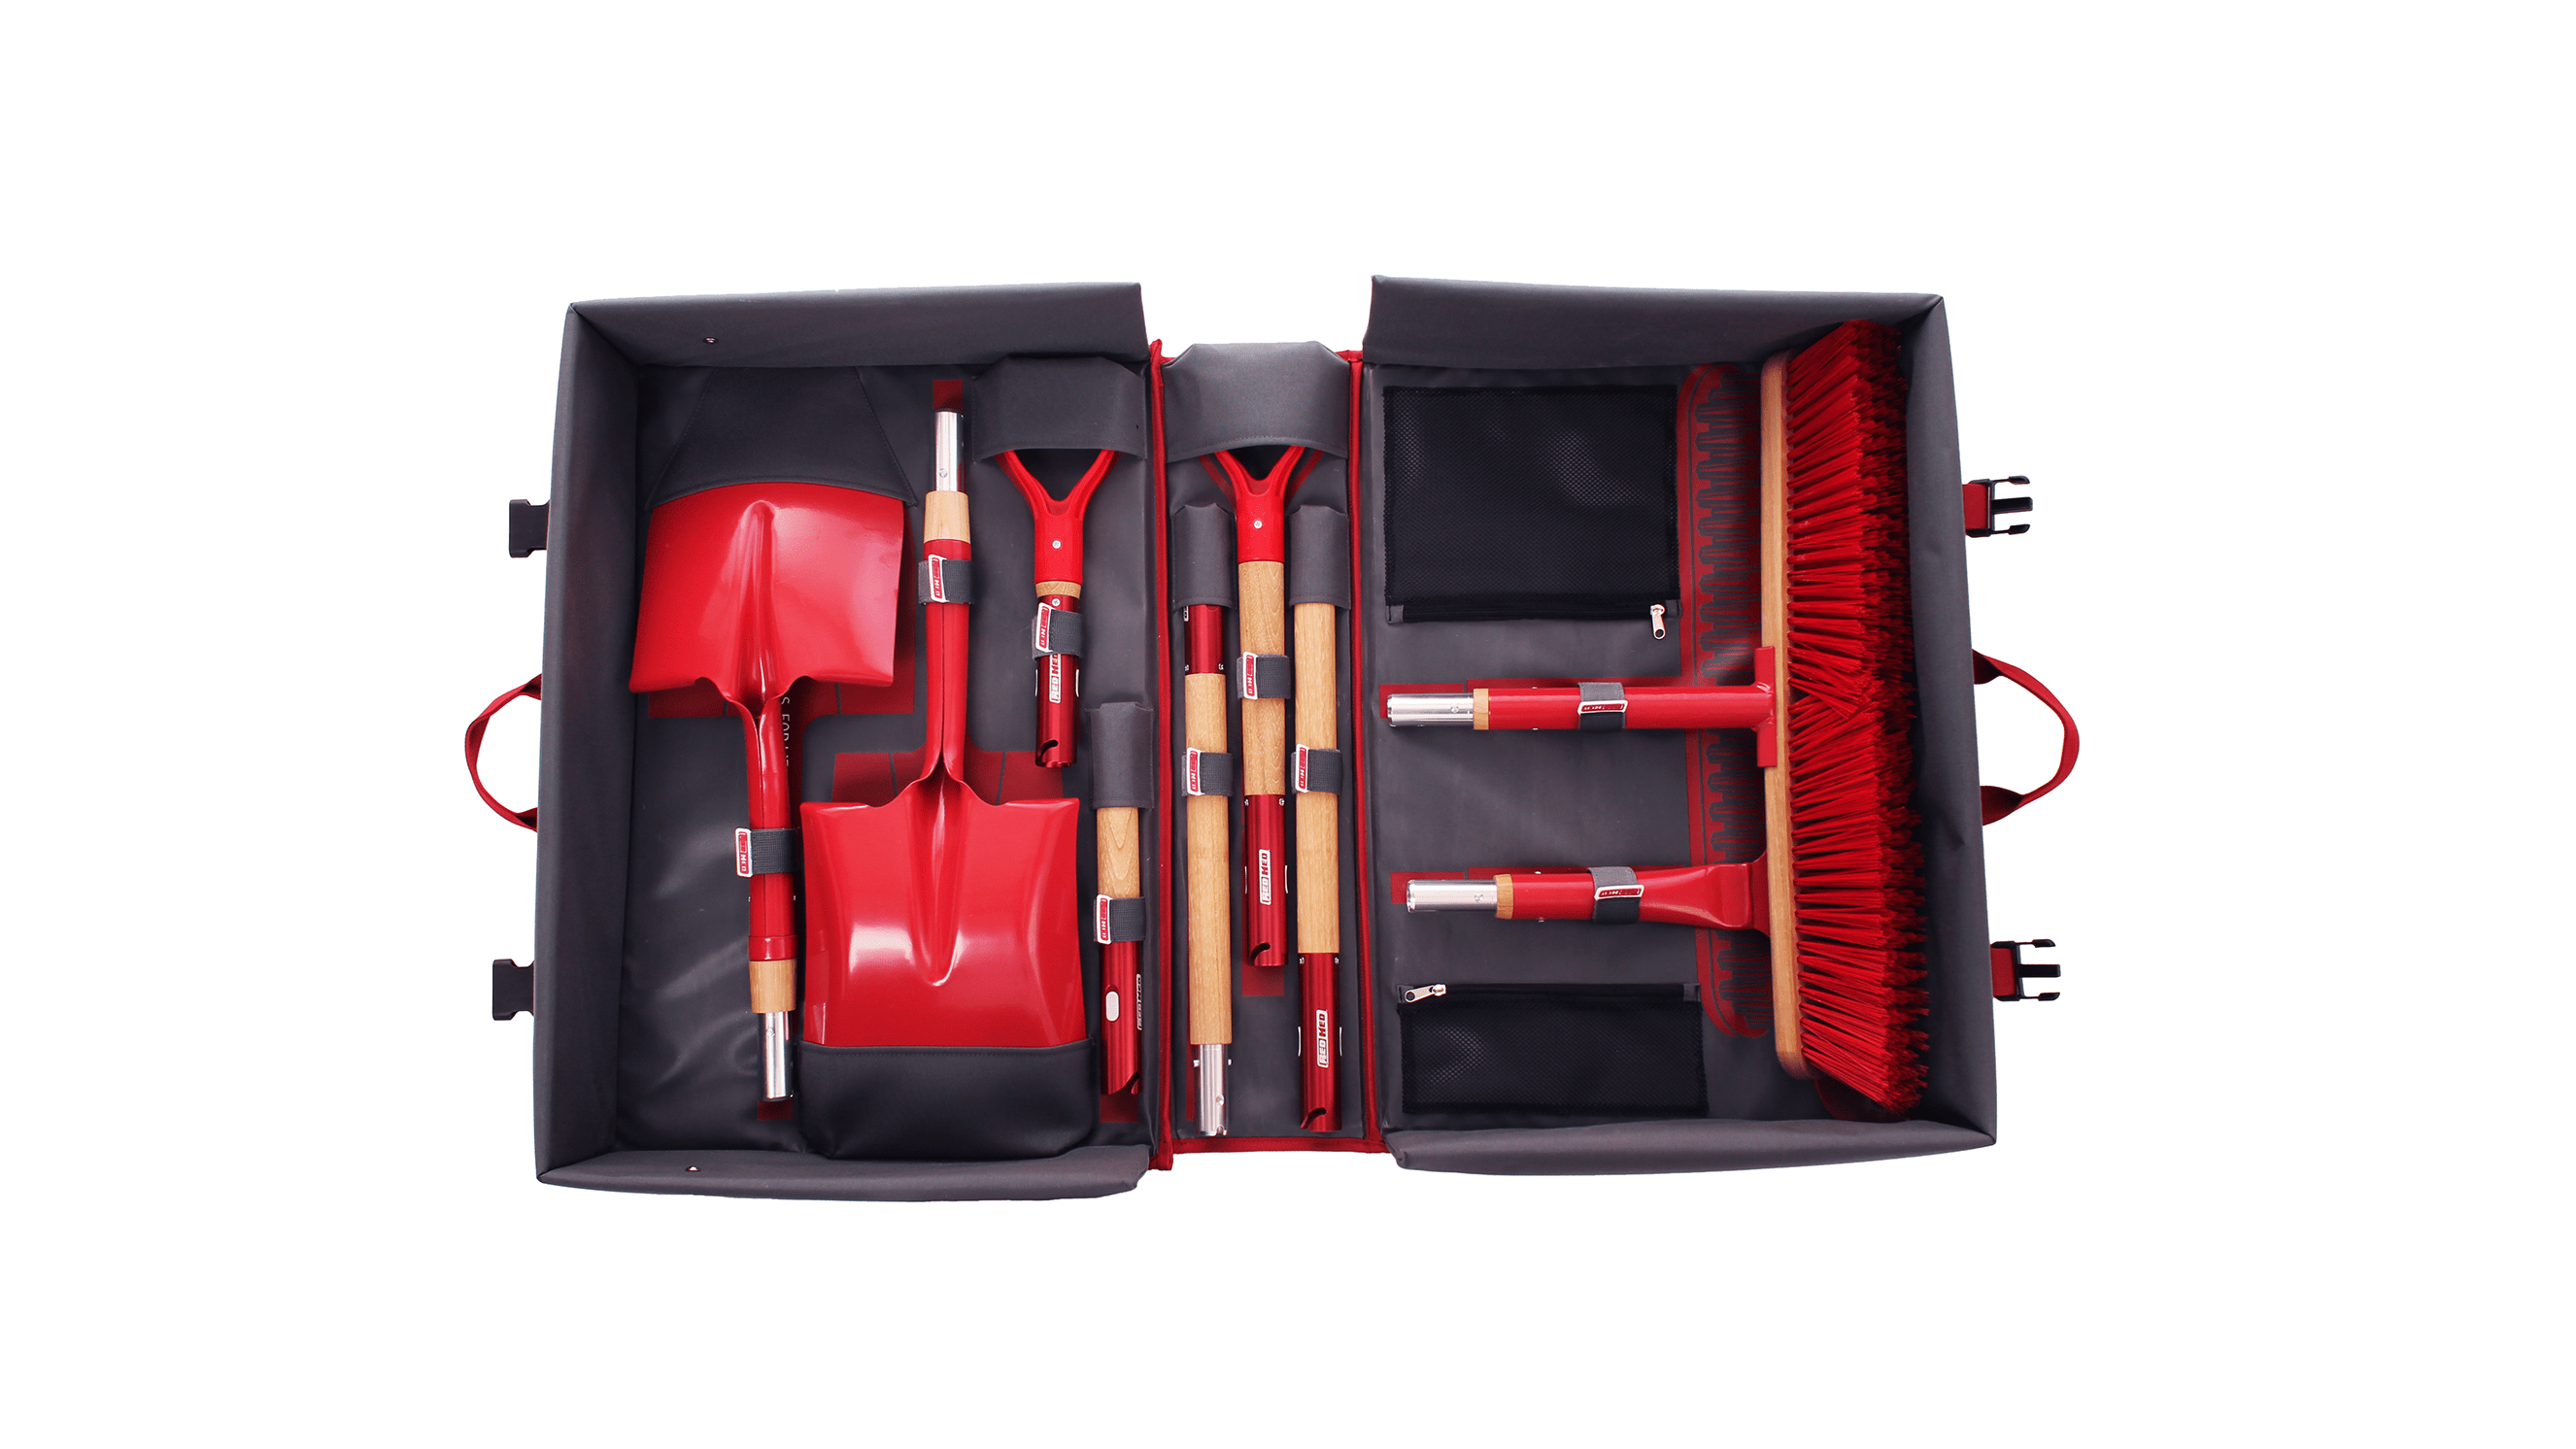 This Clever Modular Gardening Kit Fits 32 Big Tools Into One Small Bag